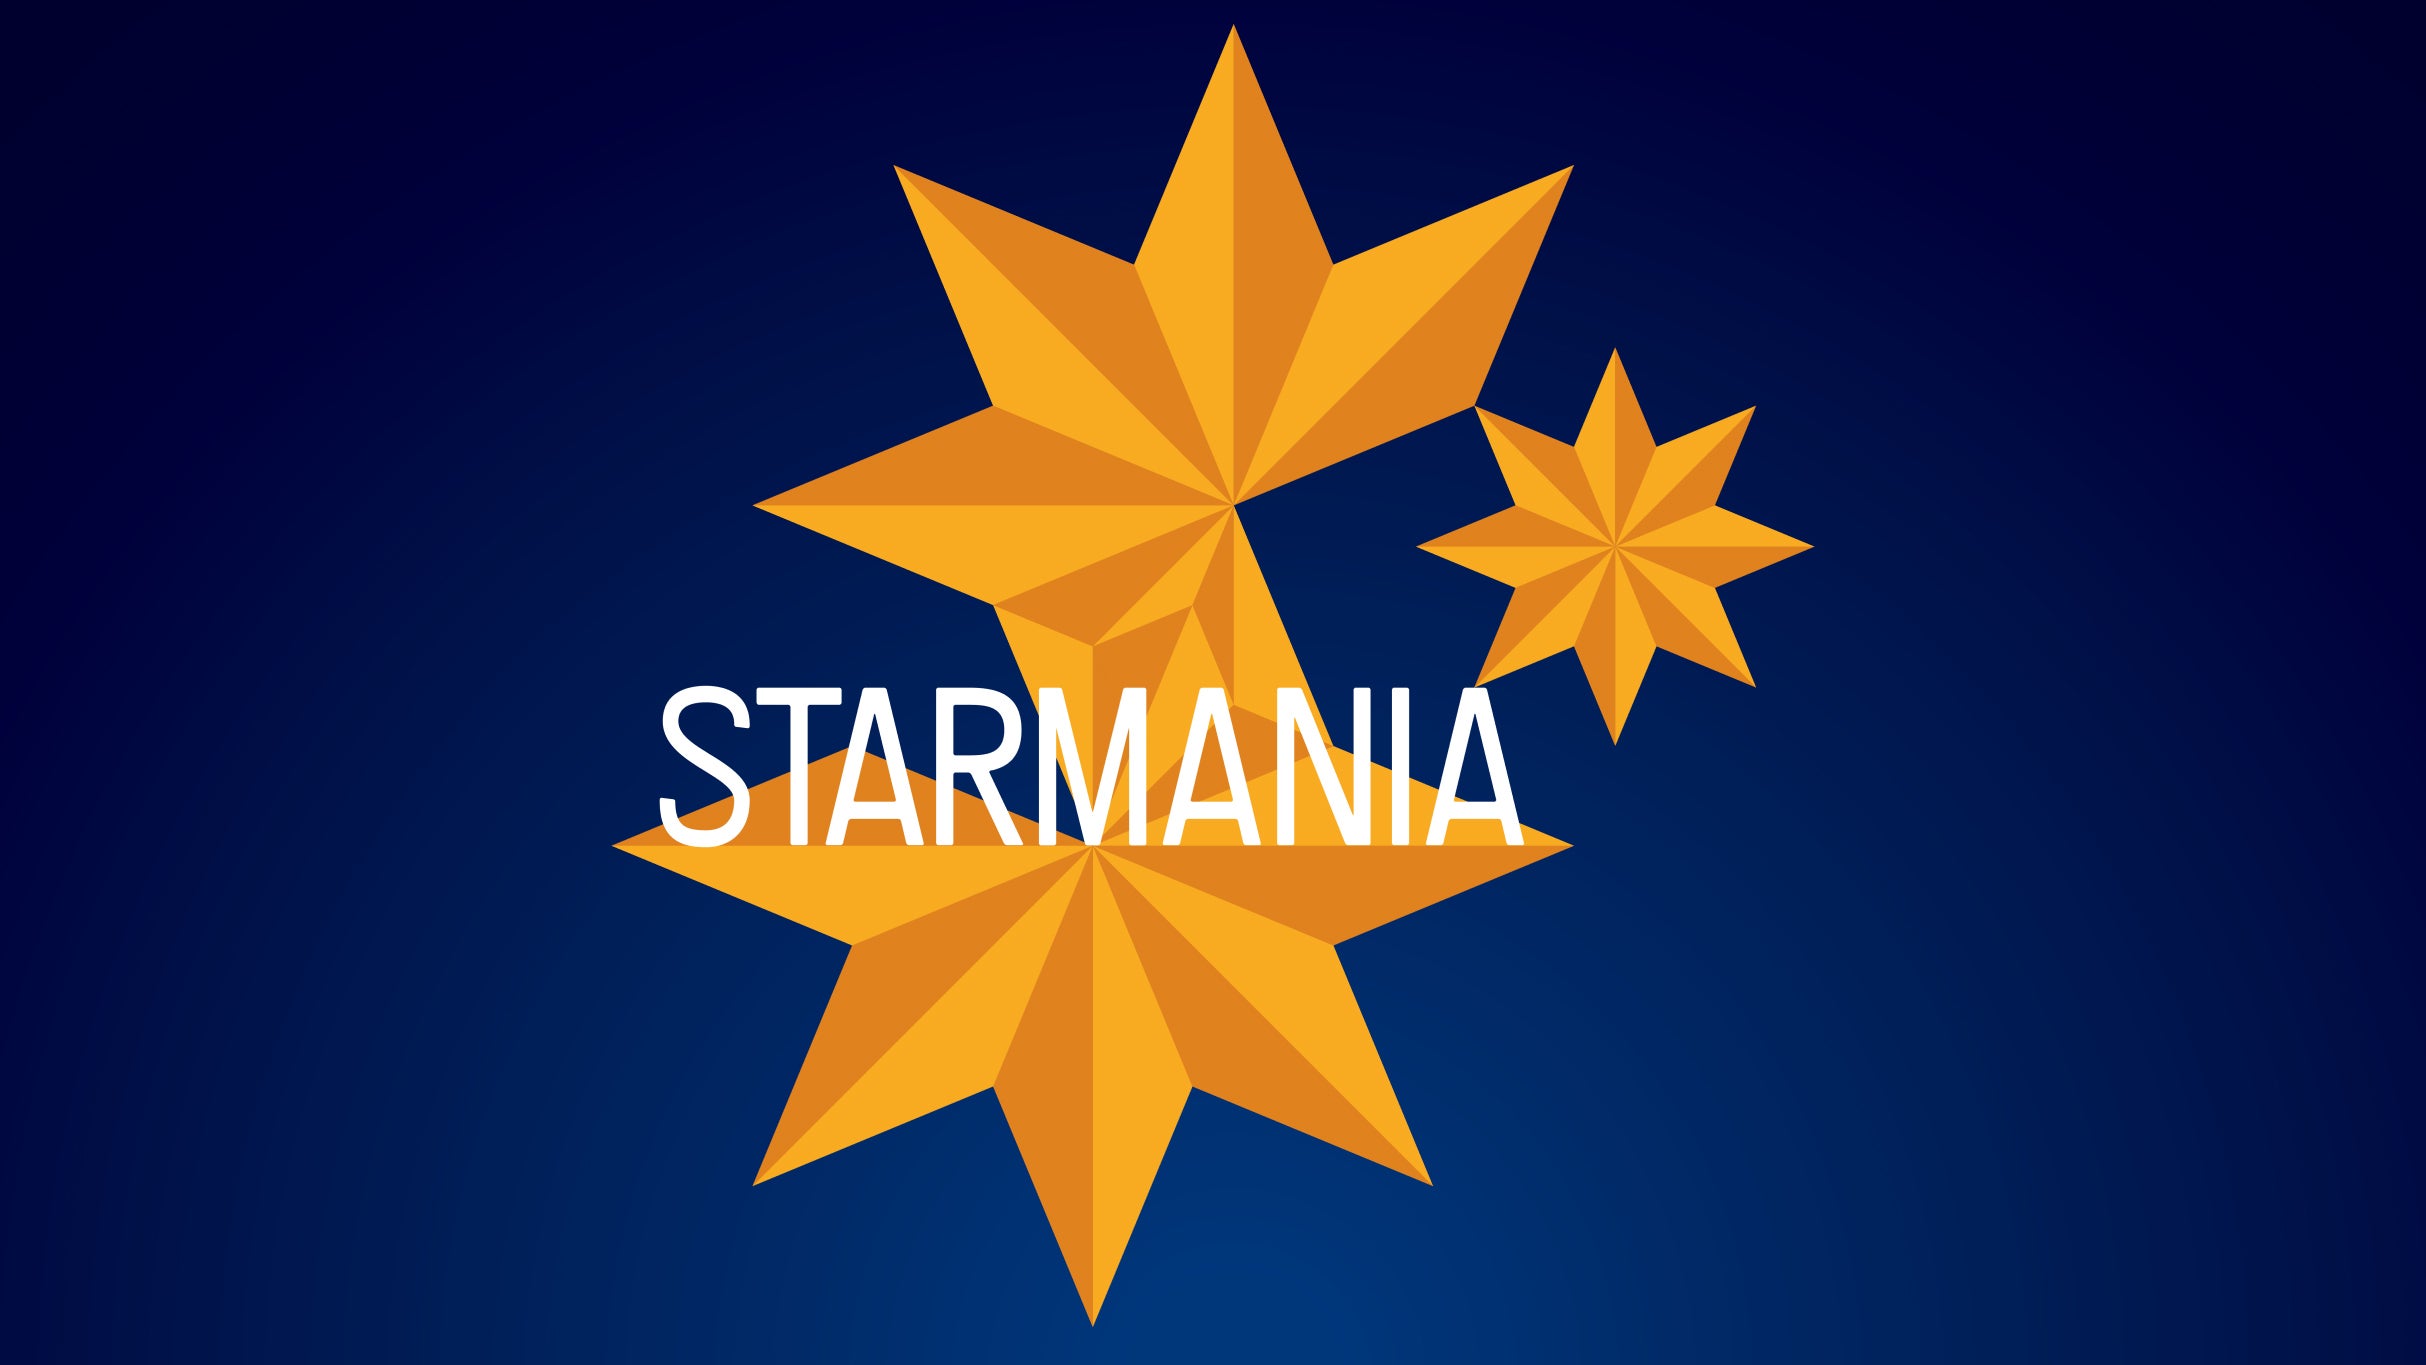 Starmania L'Opéra Rock in Laval promo photo for Sieges Platine Officiels presale offer code